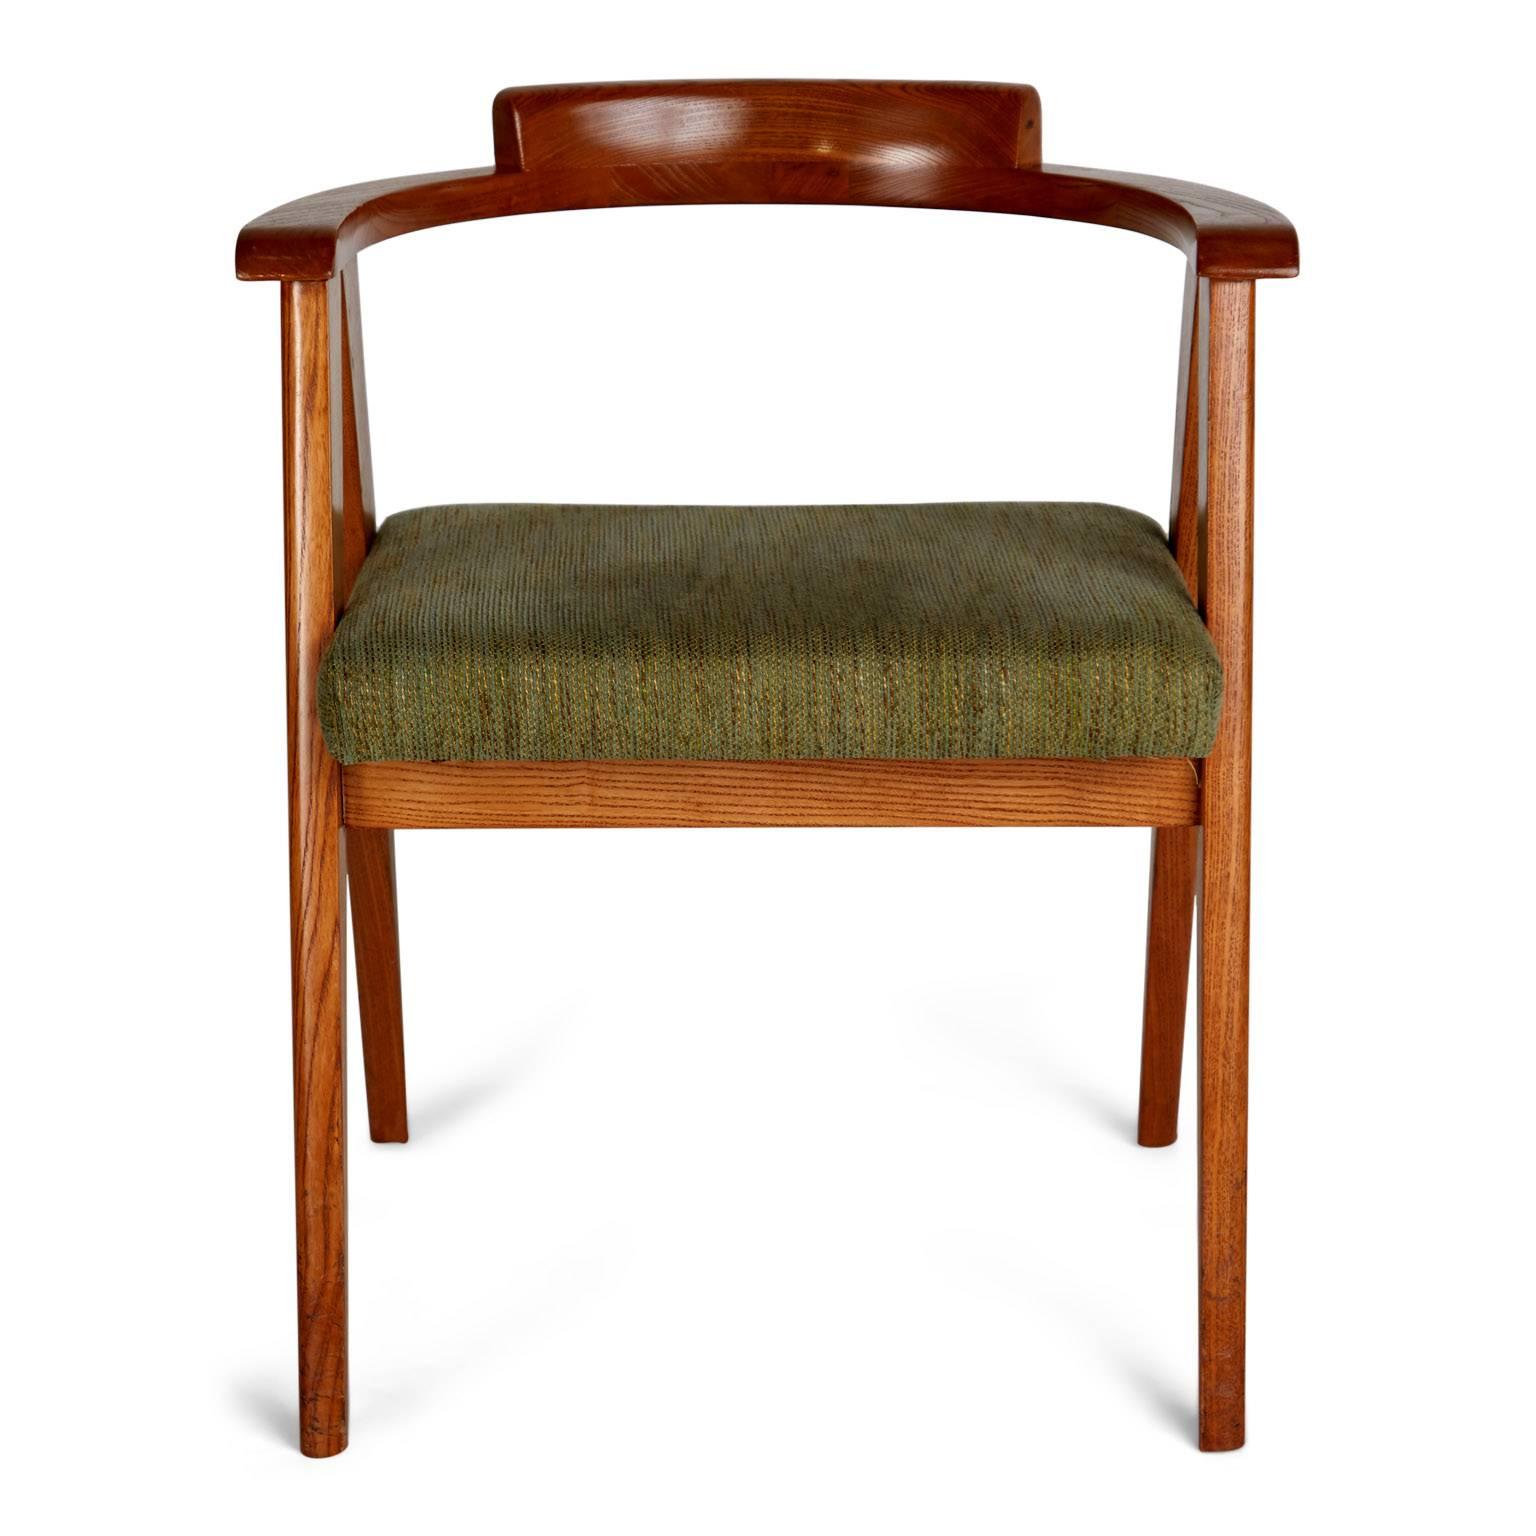 Sleekly designed chairs in the style of James Mont. These oak dining or side chairs feature sculptural a-frame legs with rounded backs and original vintage sage green upholstery which is mixed in with striped threads of citrine, burgundy seafoam and